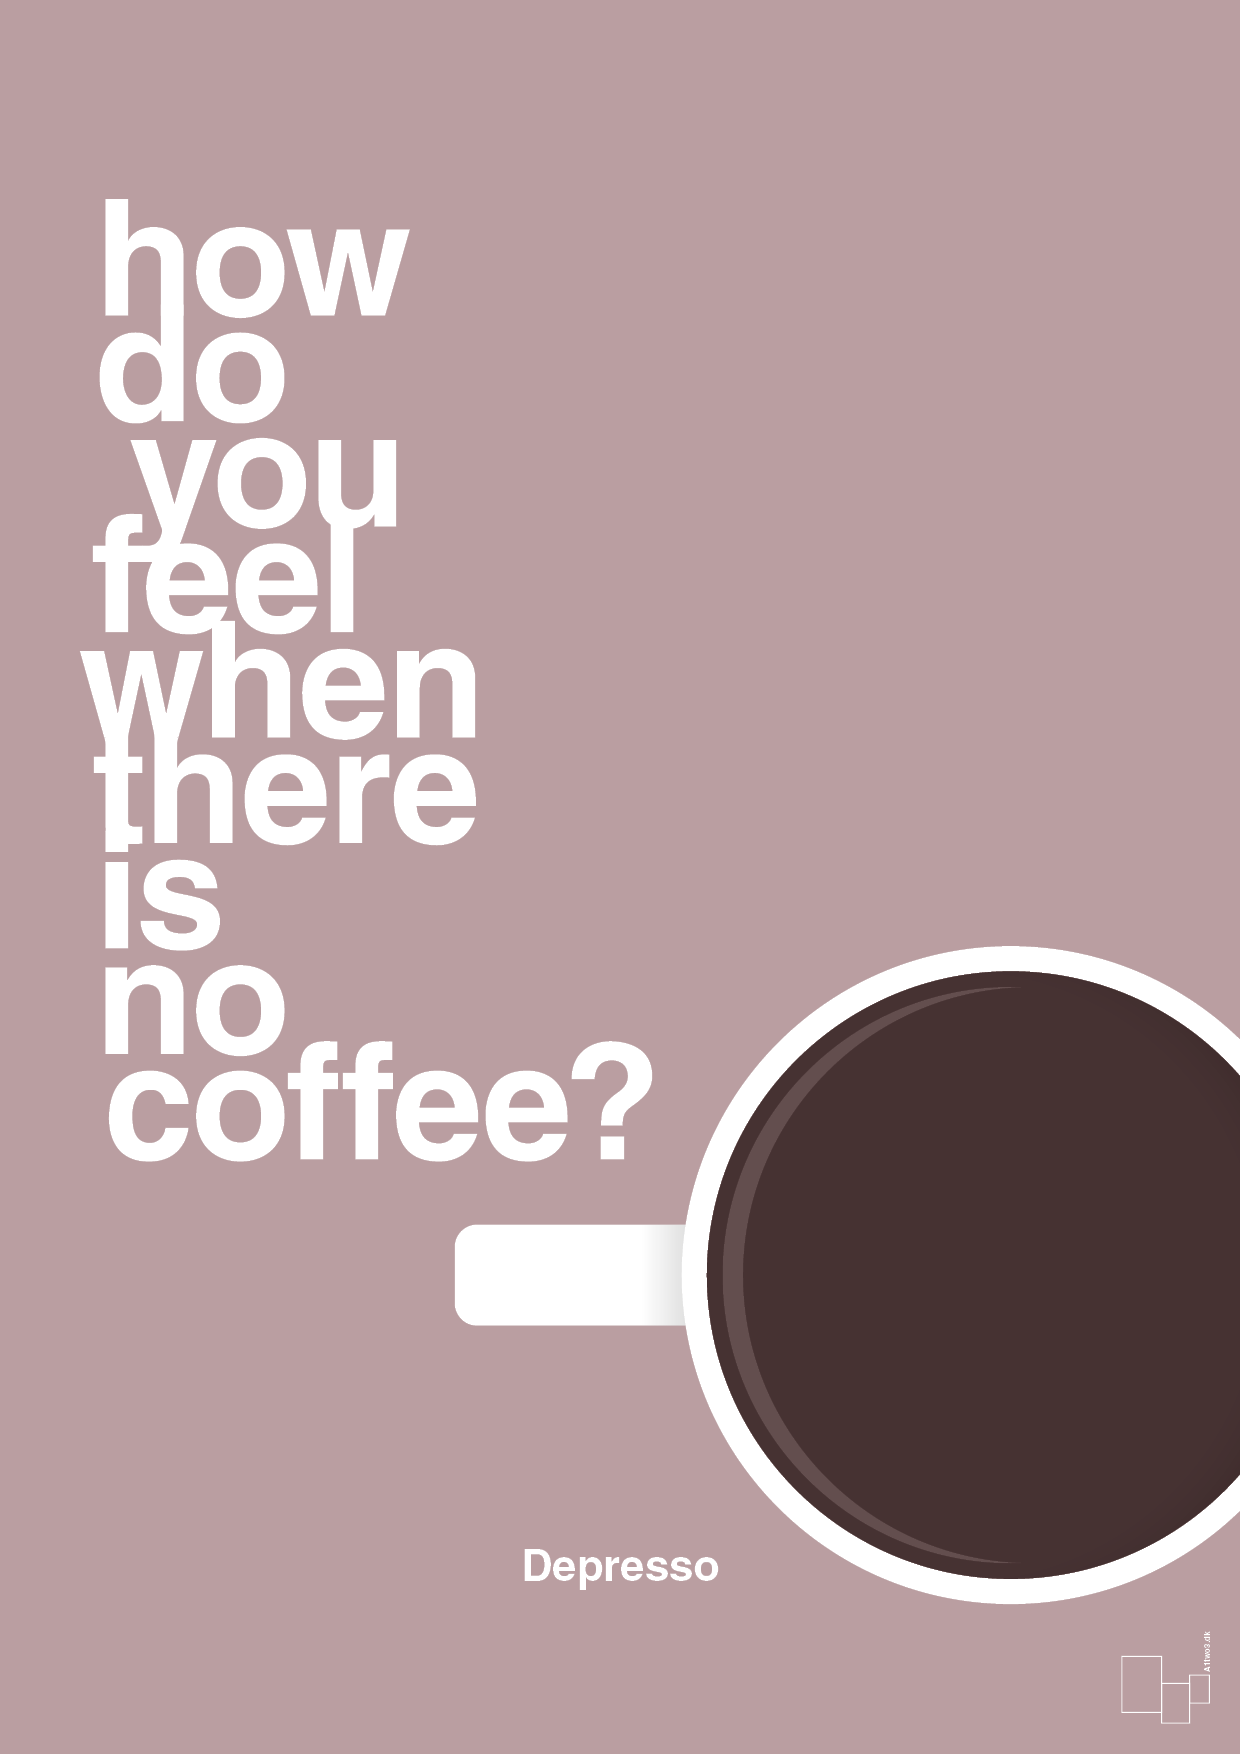 how do you feel when there is no coffee? depresso - Plakat med Mad & Drikke i Light Rose